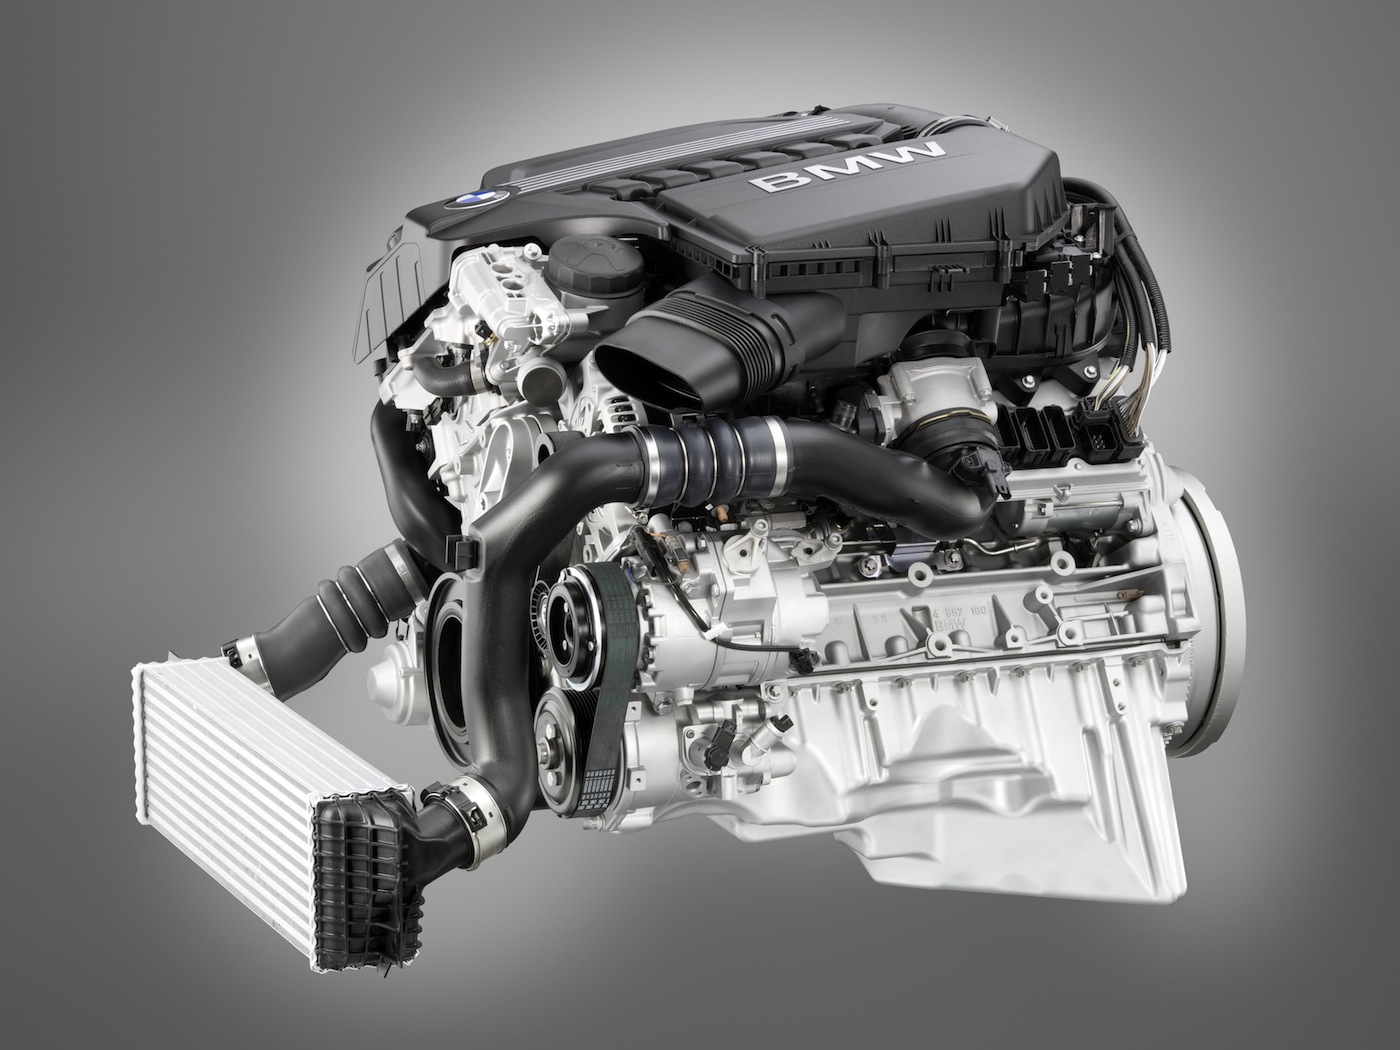 BMW N55 and N20 Engines are Winners of 2013 Ward's 10 Best Engines List